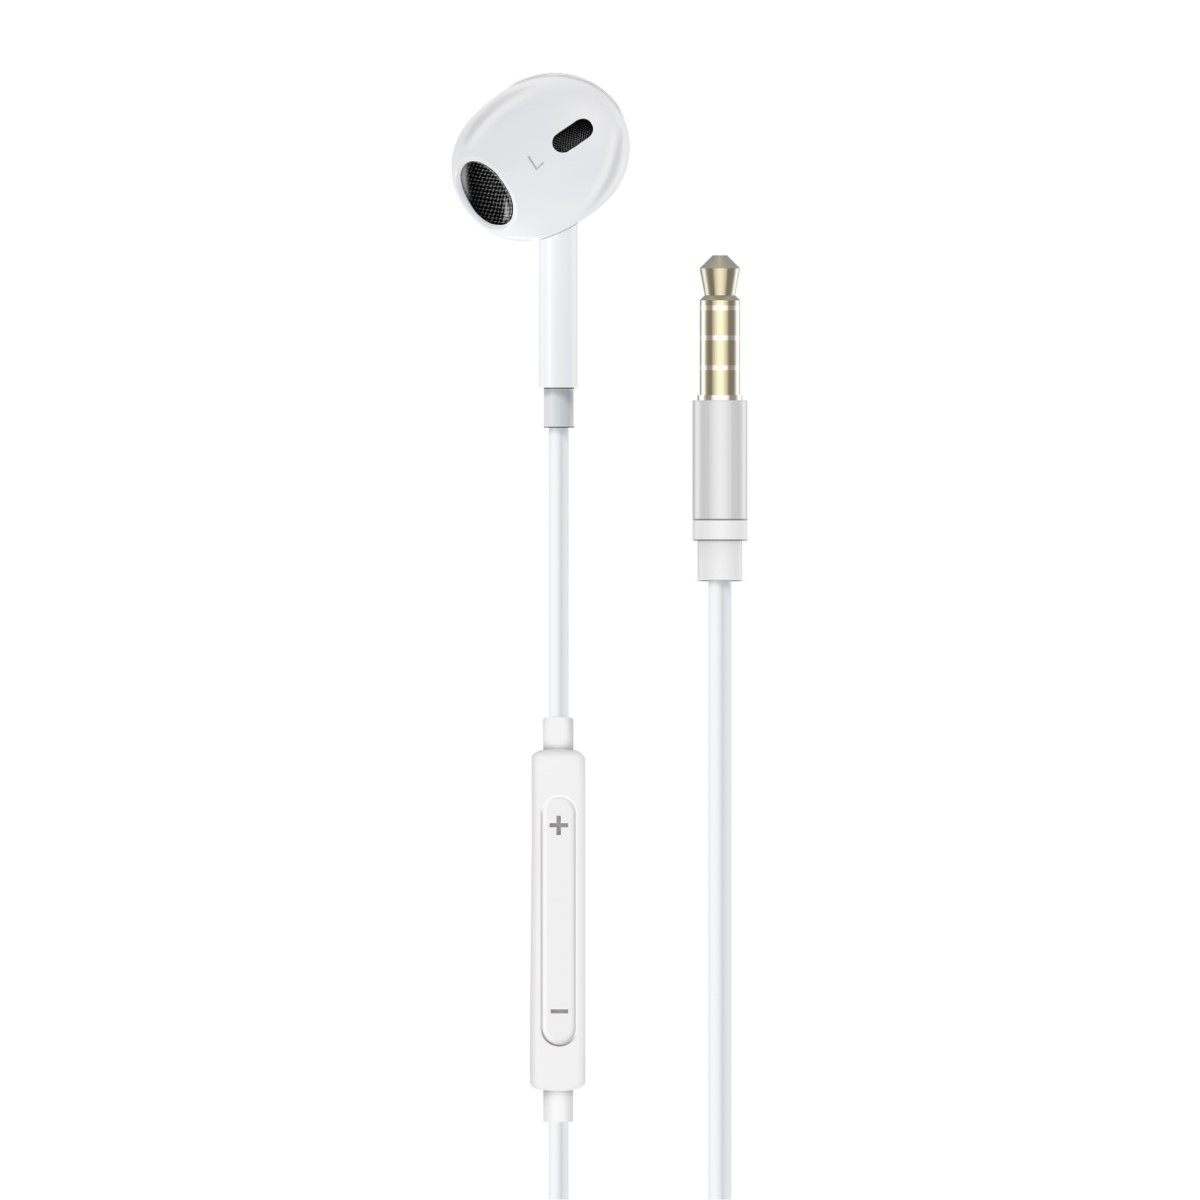 Promate Wired Mono Earphone with Microphone, Hands-Free Calling and Button Controls, Buzz.White